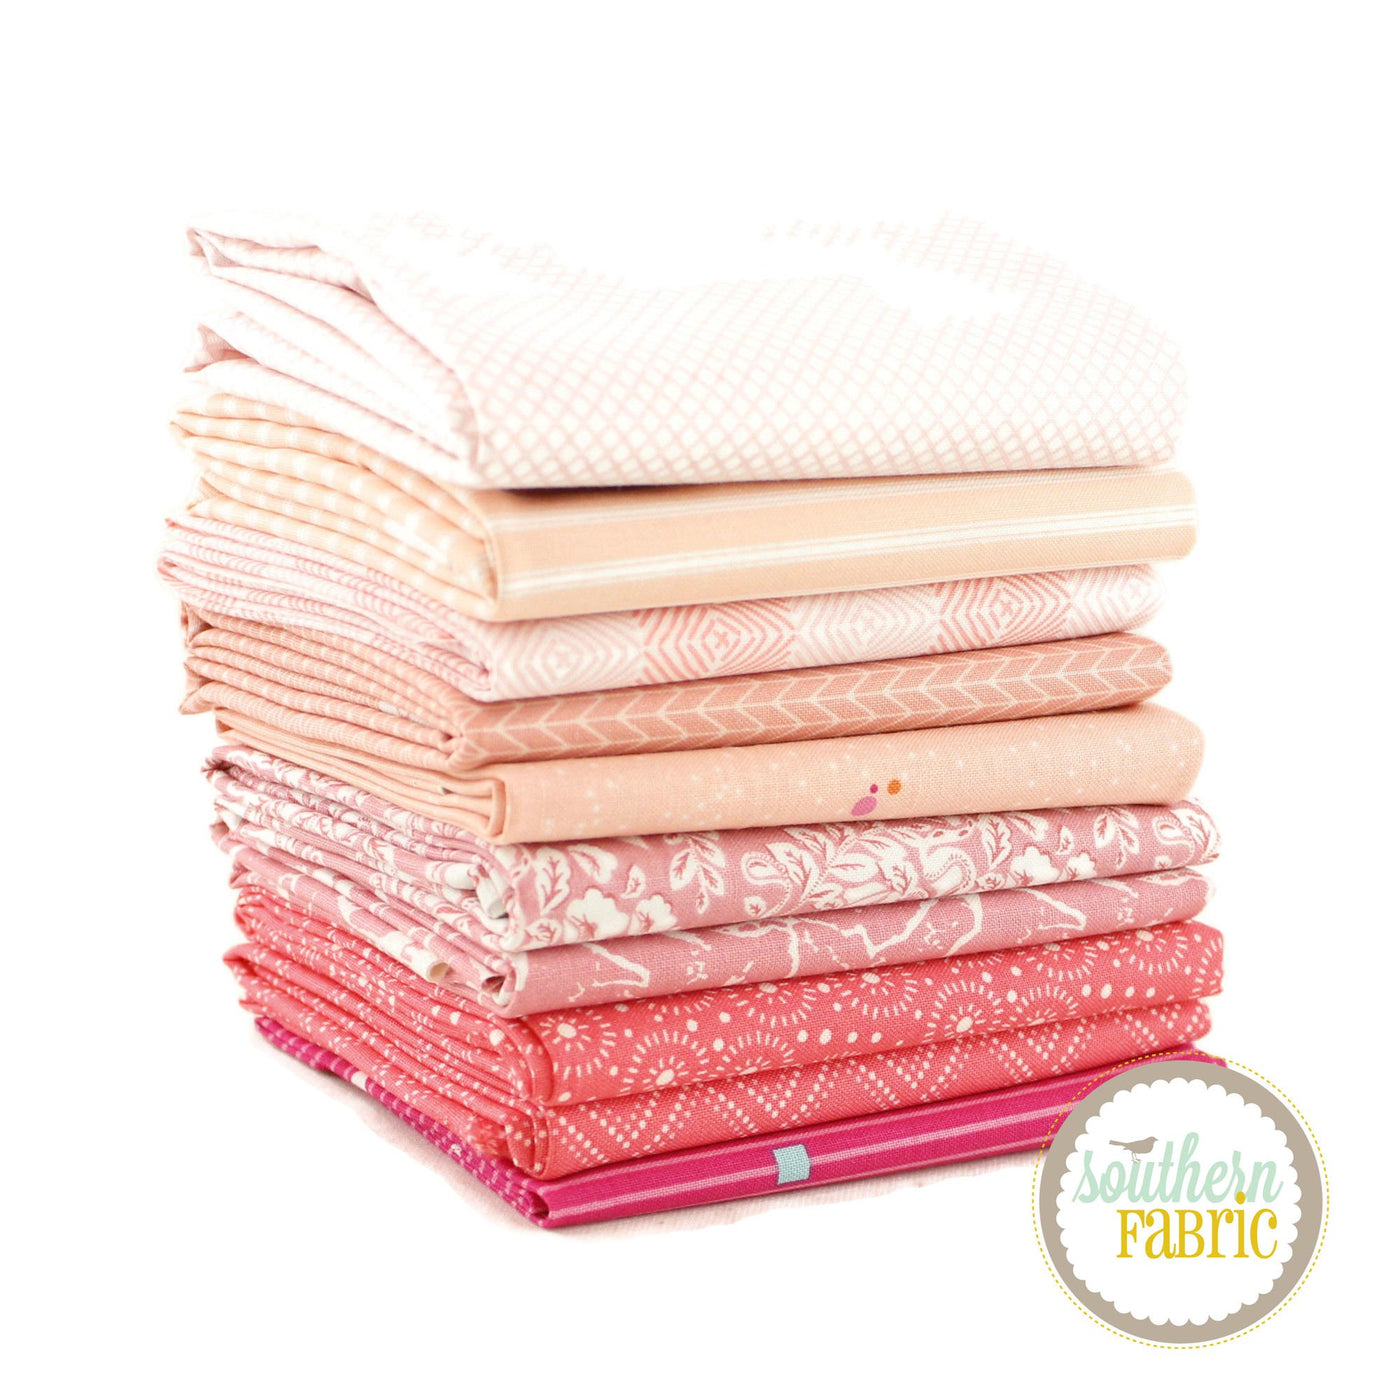 Pink Fat Quarter Bundle (10 pcs) by Mixed Designers for Southern Fabric